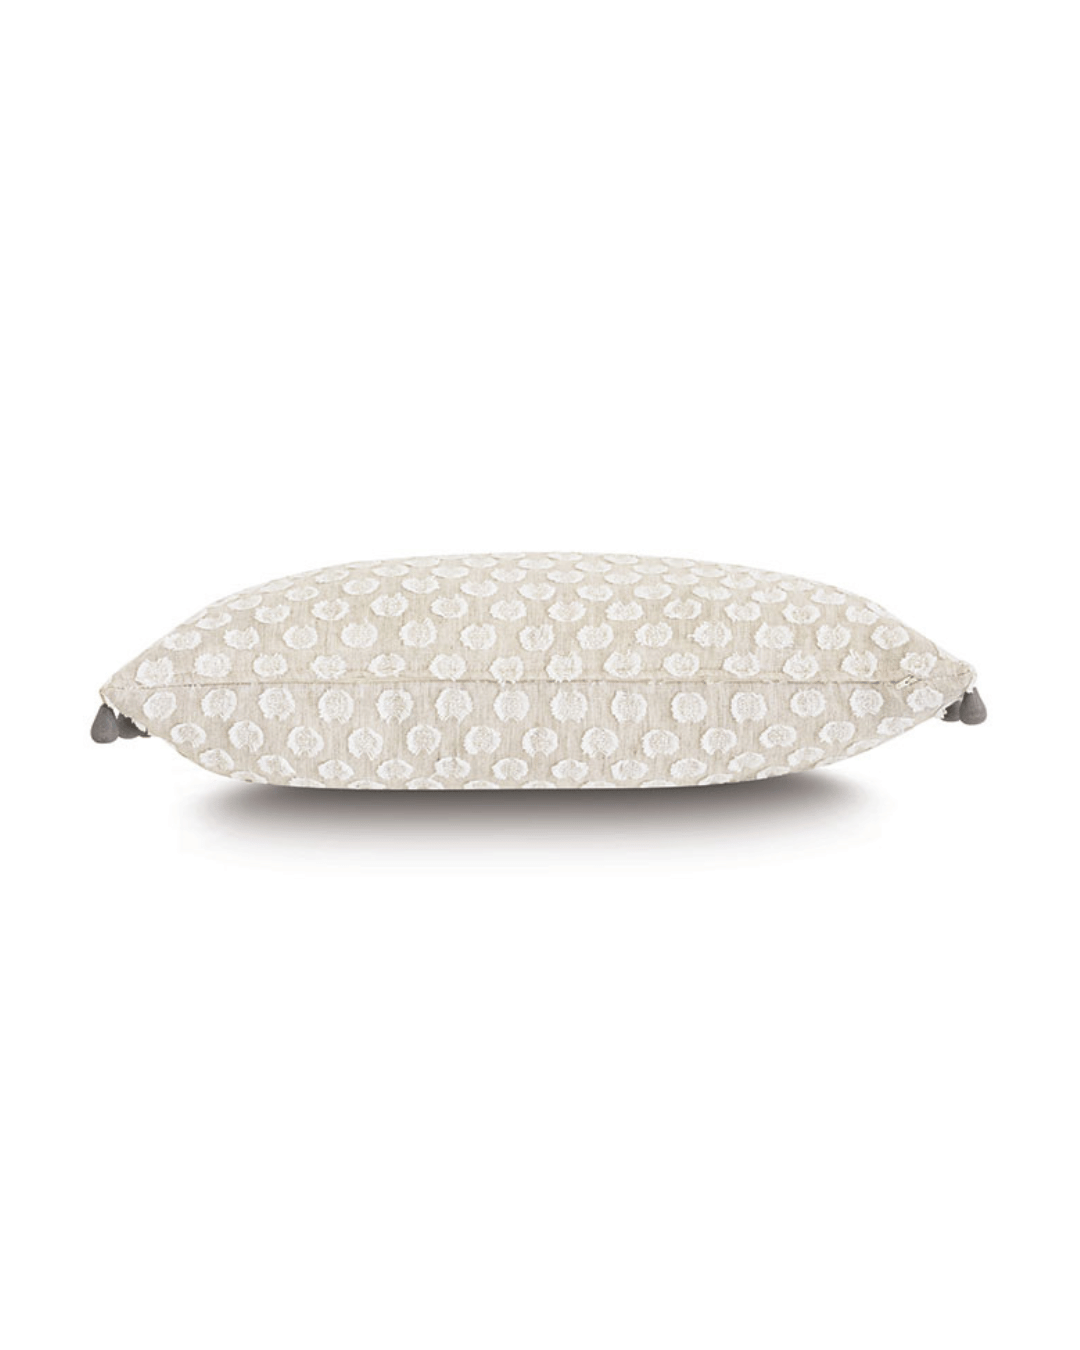 Eastern Accents' Beaded Trim Decorative Pillow with a textured white cover featuring a dotted pattern, displayed in a bungalow-style against a plain white background.